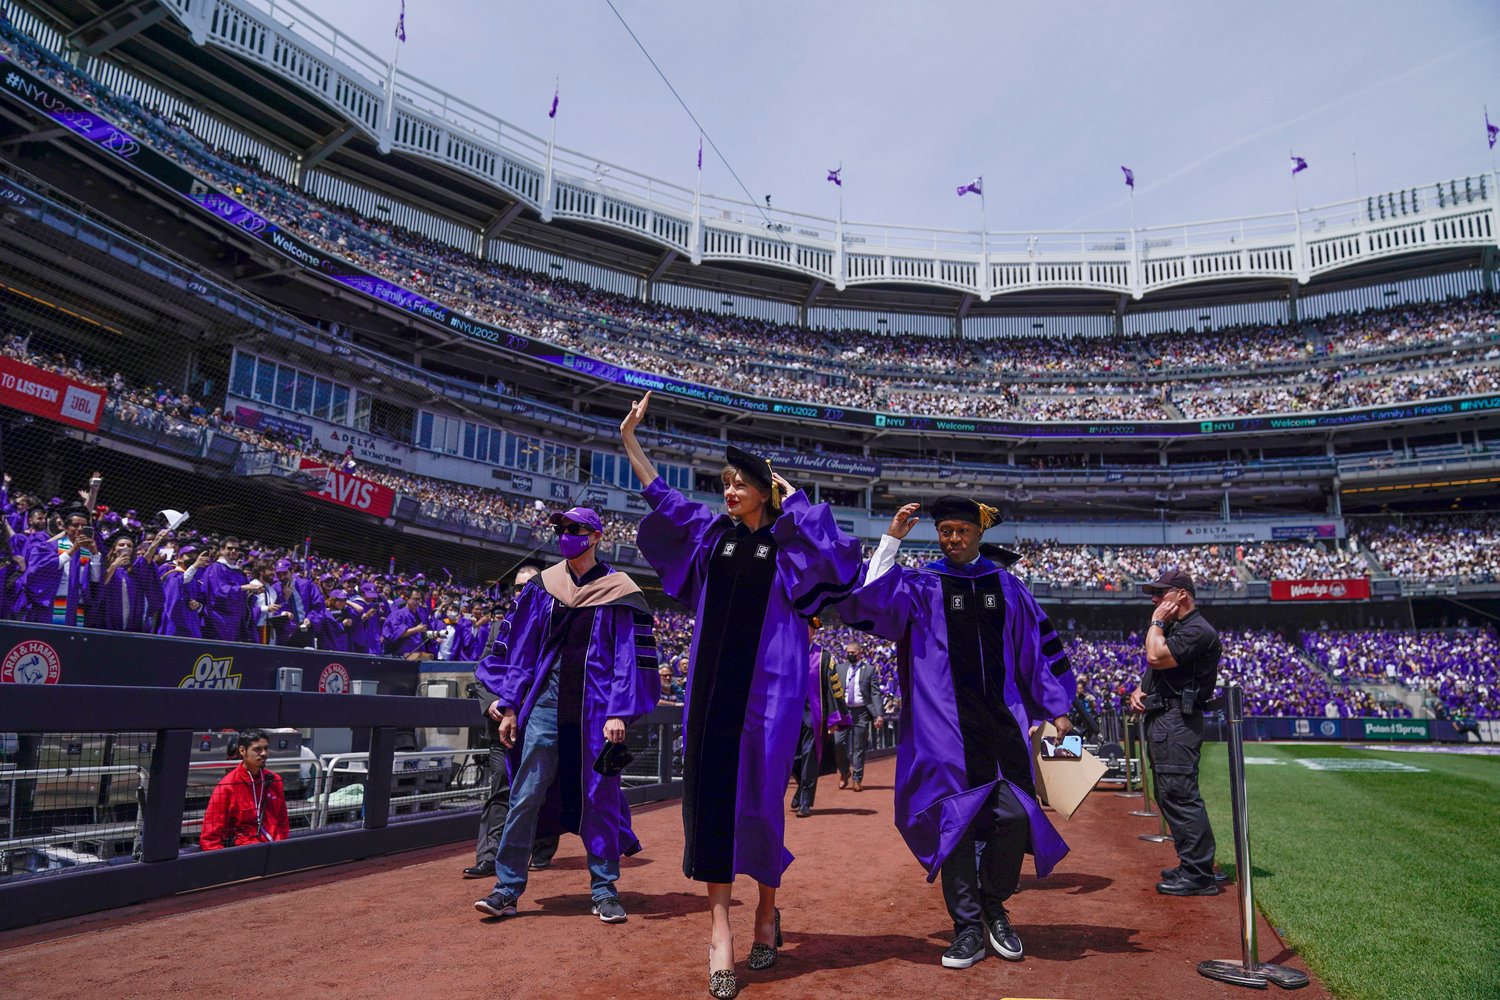 Taylor Swift, center, waves to graduates as she participates in a graduation ceremony for New York University at Yankee Stadium in New York, Wednesday, May 18, 2022. (AP Photo/Seth Wenig)